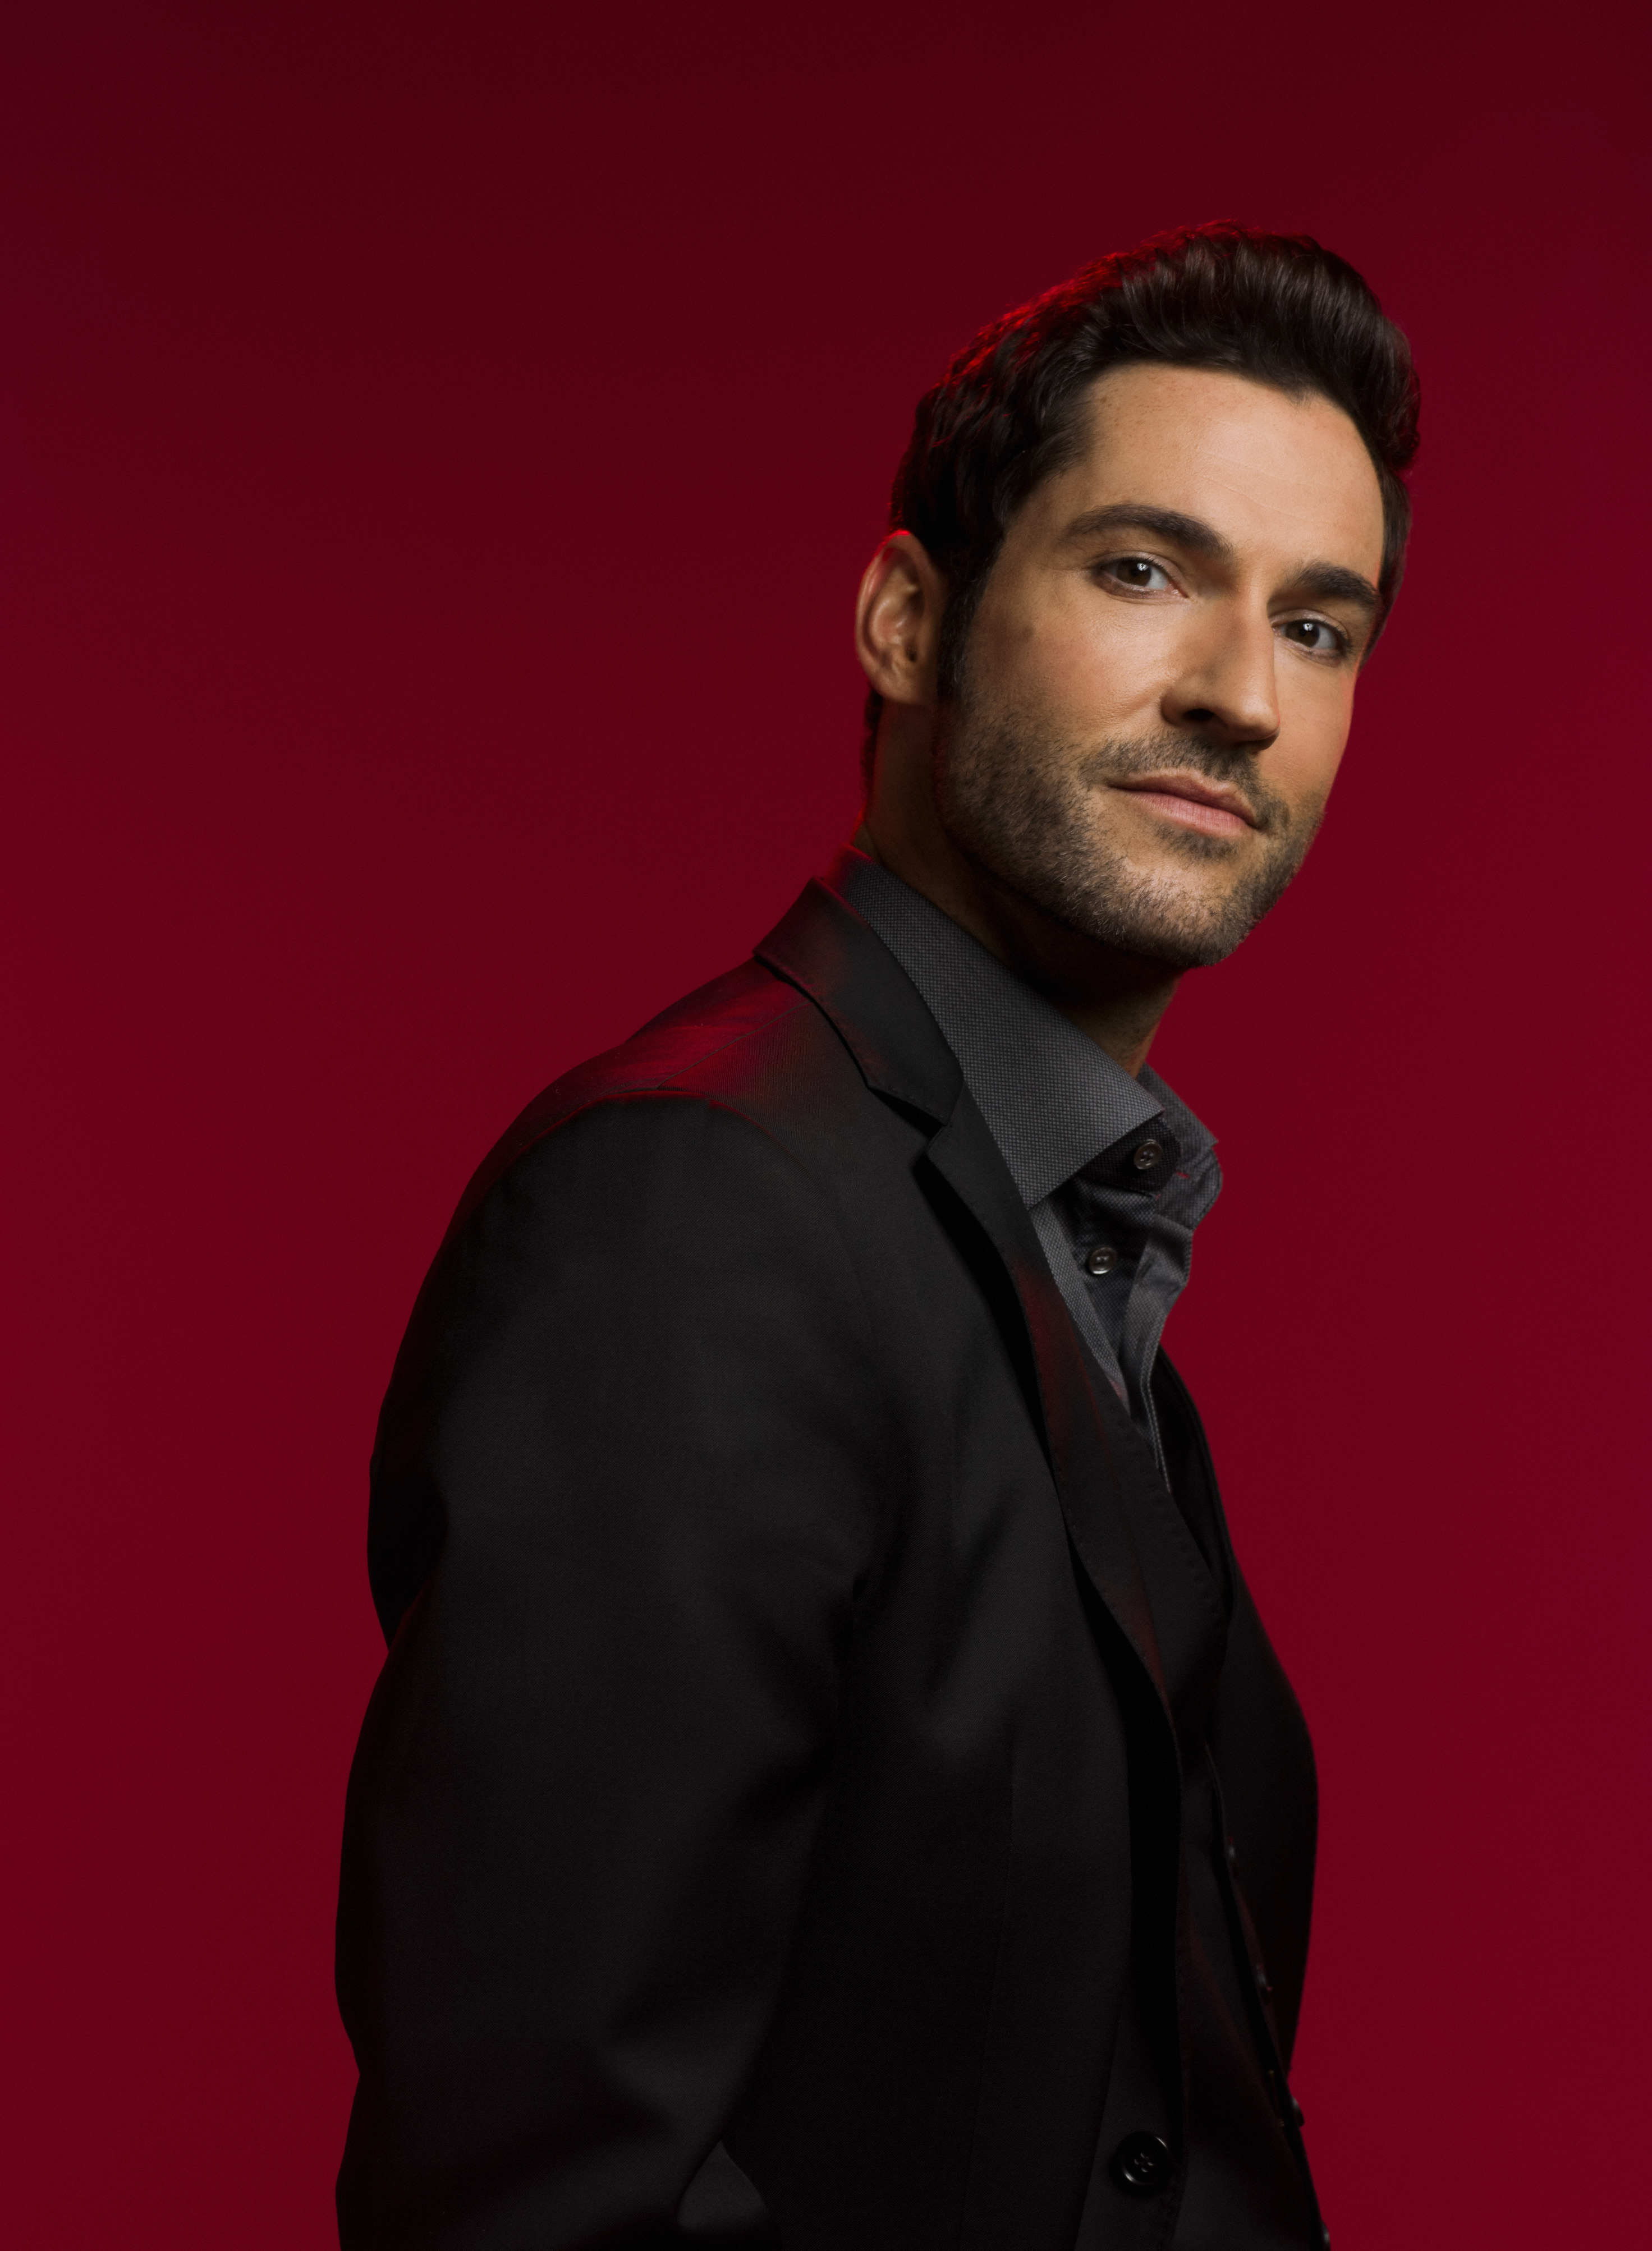 Lucifer Season 3 Premiere & Cast Gallery Photos with Tom Welling! | KSiteTV